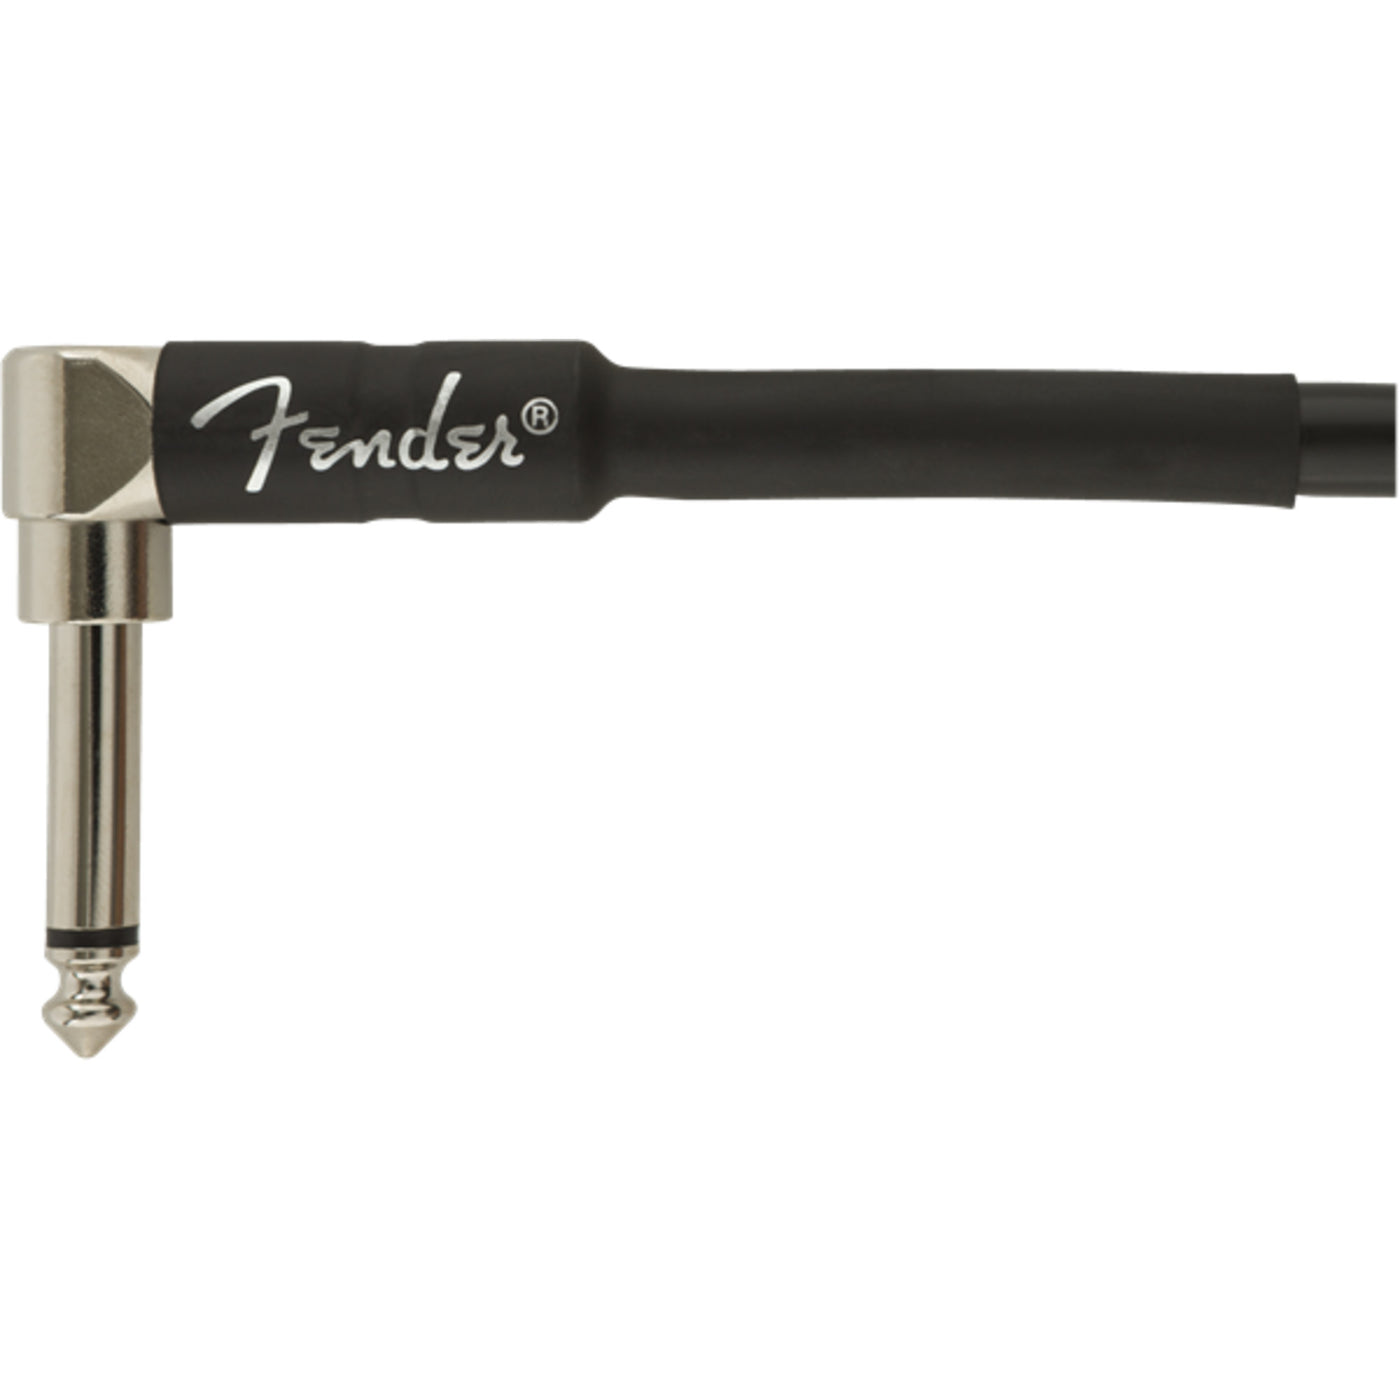 Fender Professional Series 18.6-Foot Straight to Angle Instrument Cable - Black (0990820019)